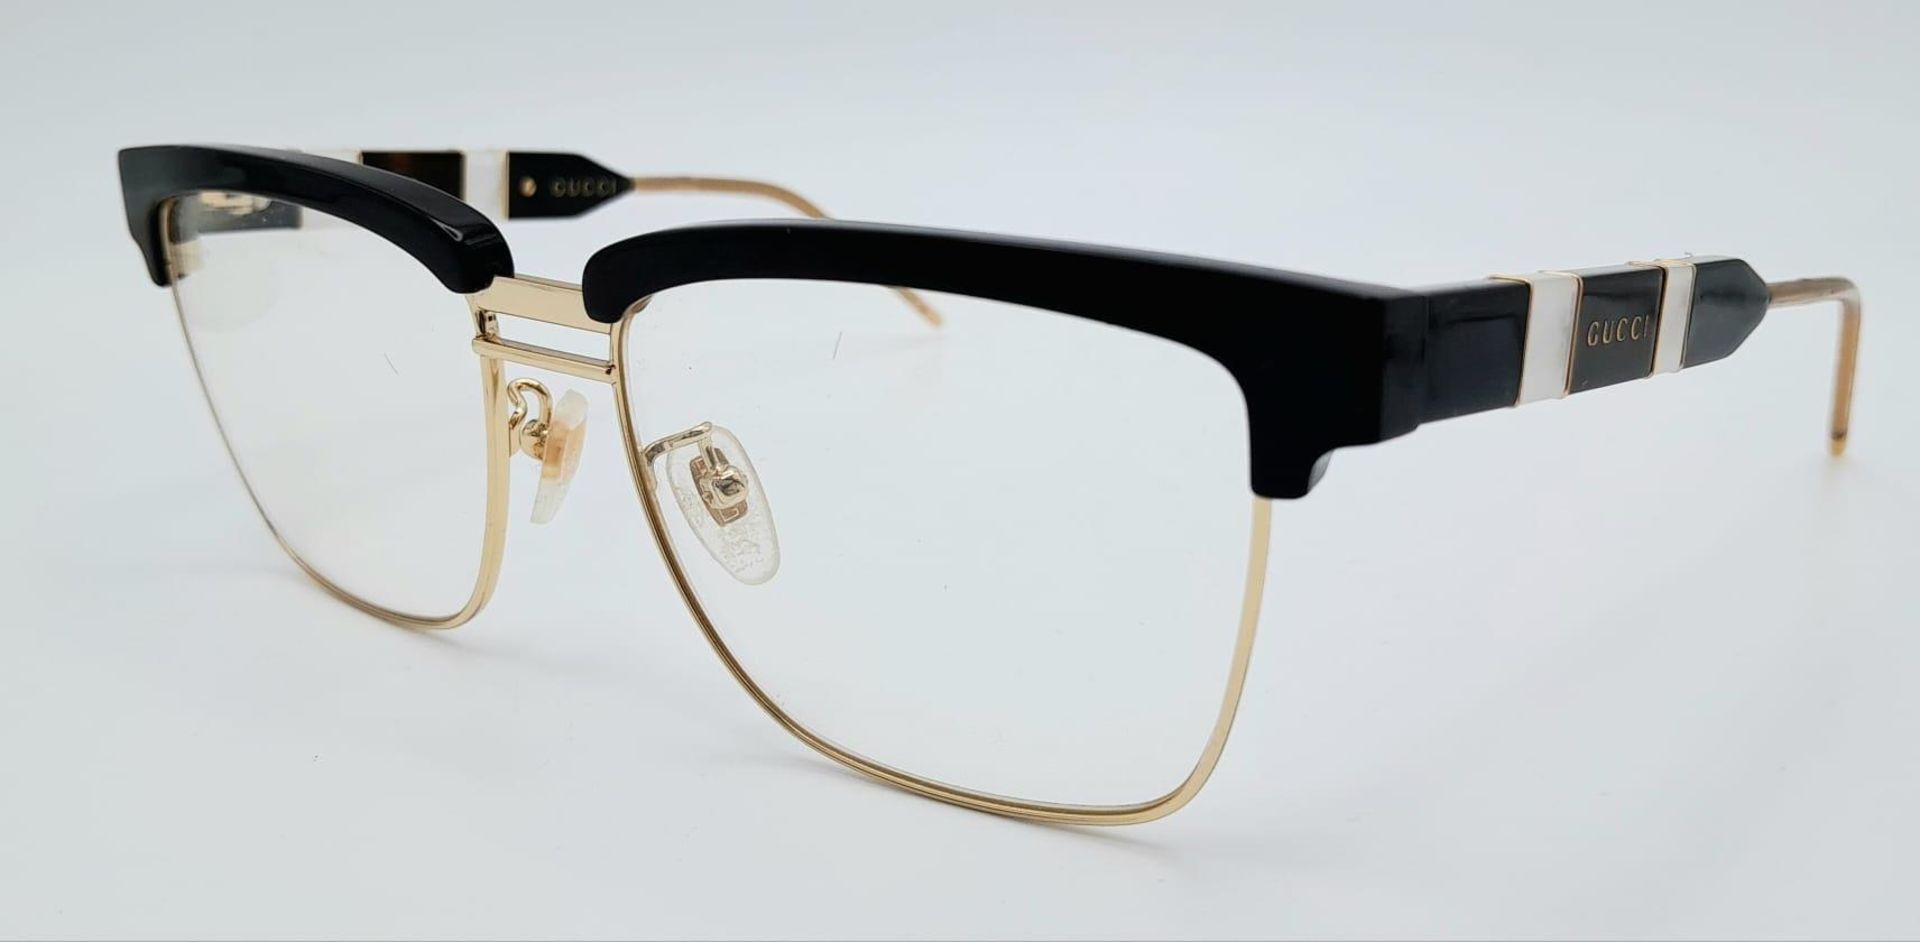 A GUCCI pair of glasses, gold plated in parts with mother of pearl highlights. Very stylish! - Image 2 of 5